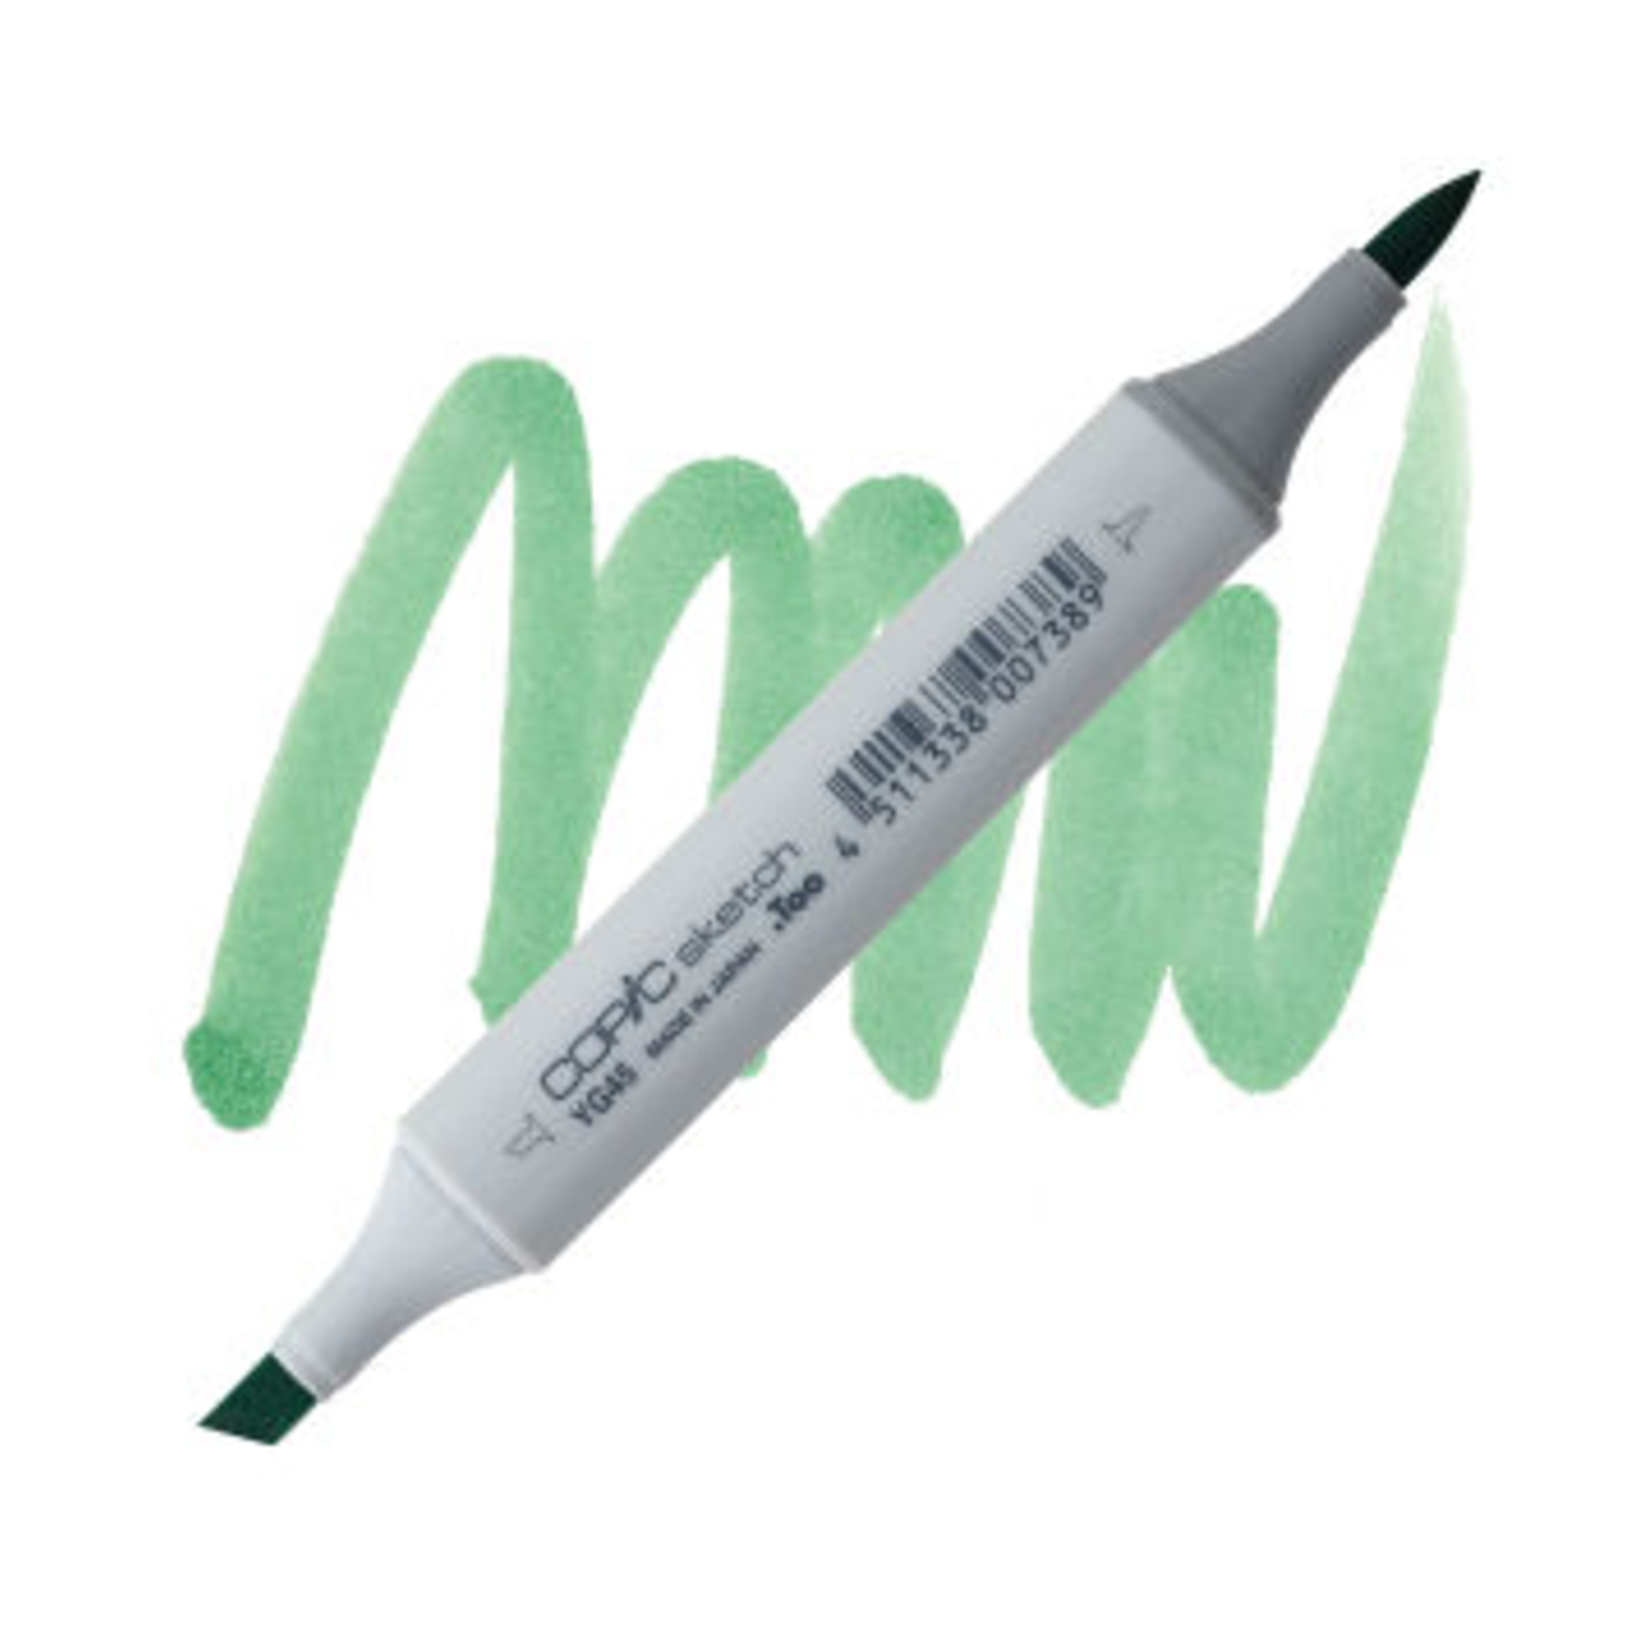 Copic Copic Marker YG45 - COBALT GREEN